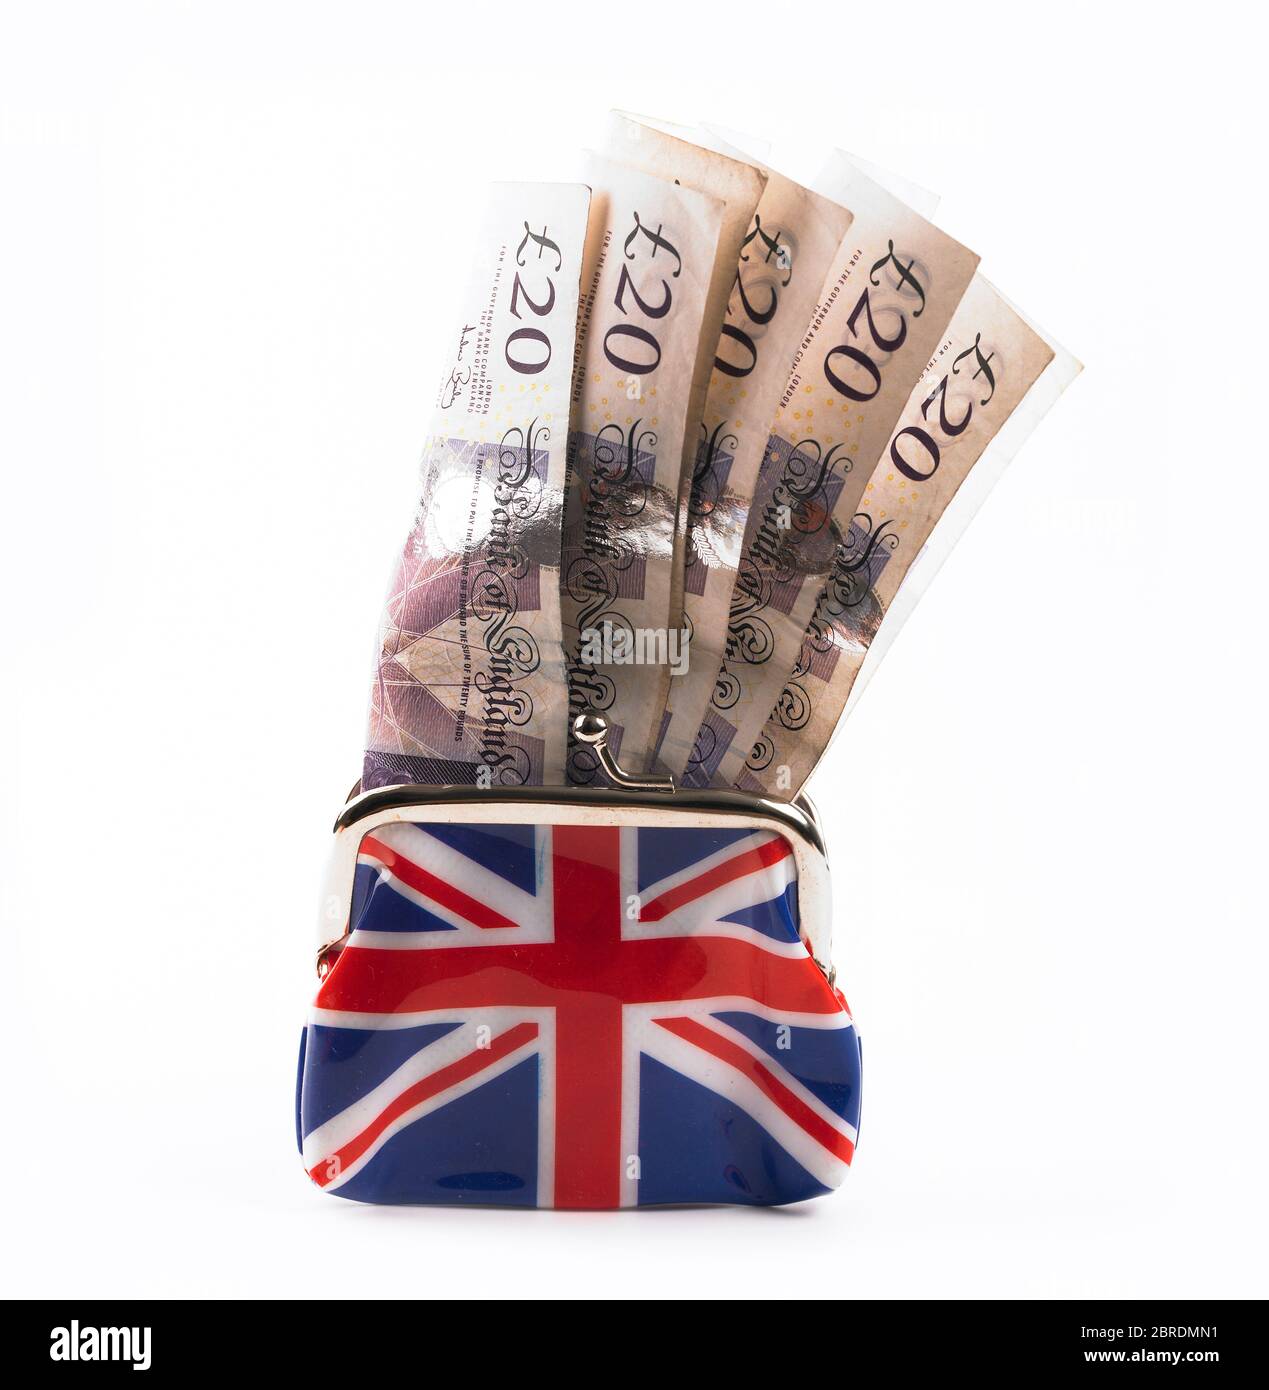 £20 notes stuffed into Union Jack clasp purse on a white background Stock Photo